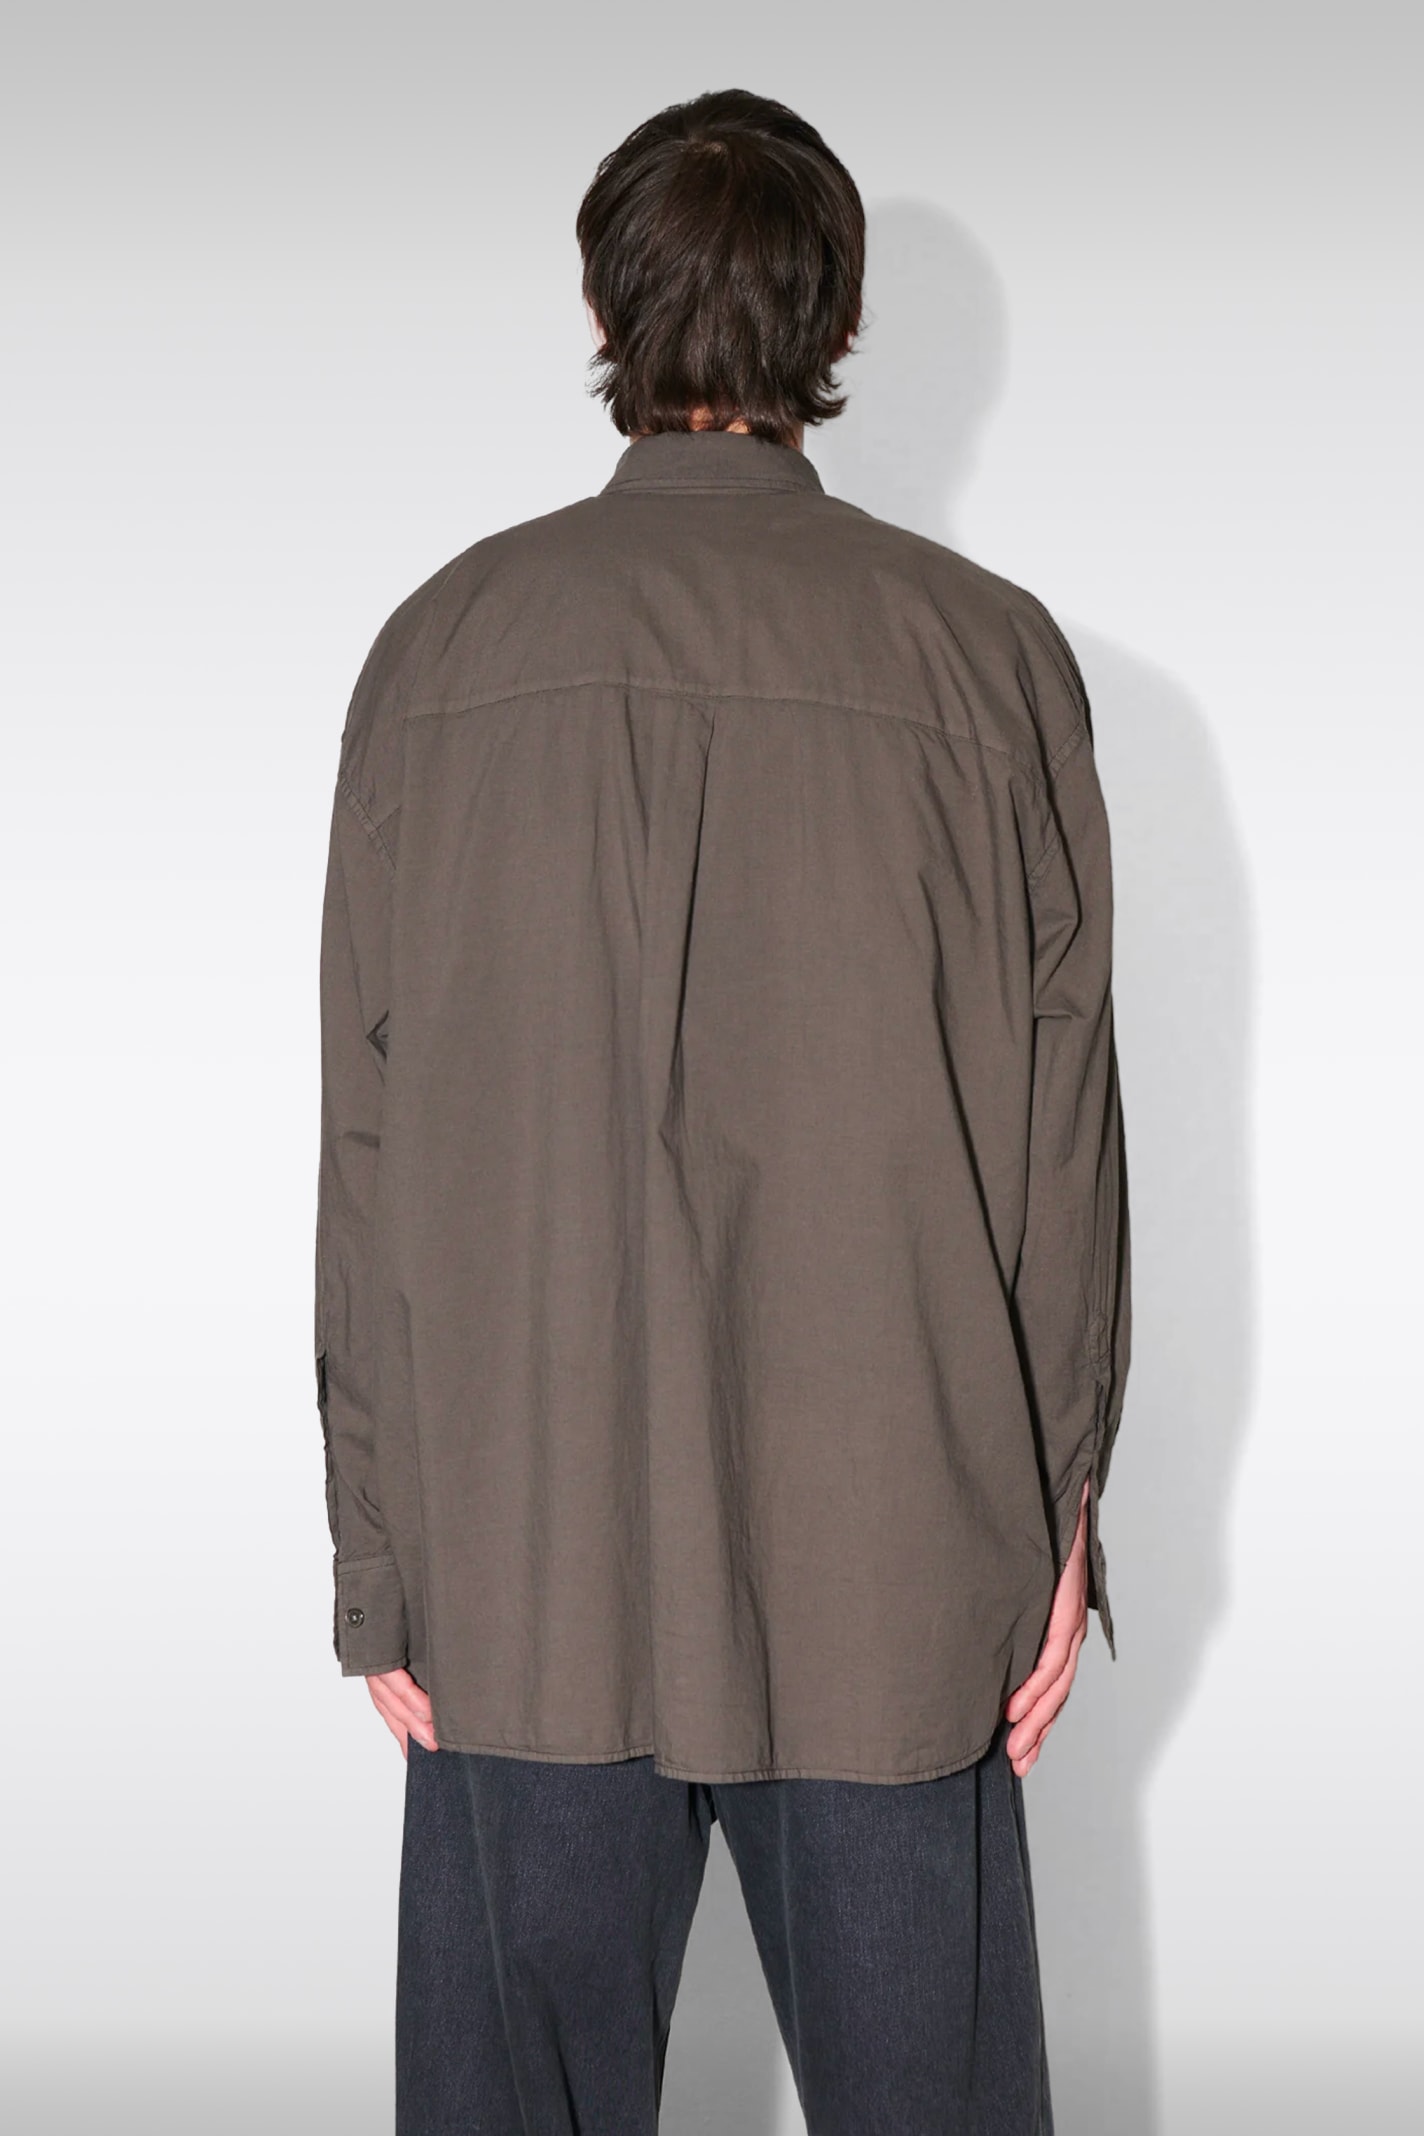 Shop Our Legacy Borrowed Bd Shirt Faded Brown Lightweight Cotton Shirt With Long Sleeves - Borrowed Bd Shirt In Marrone